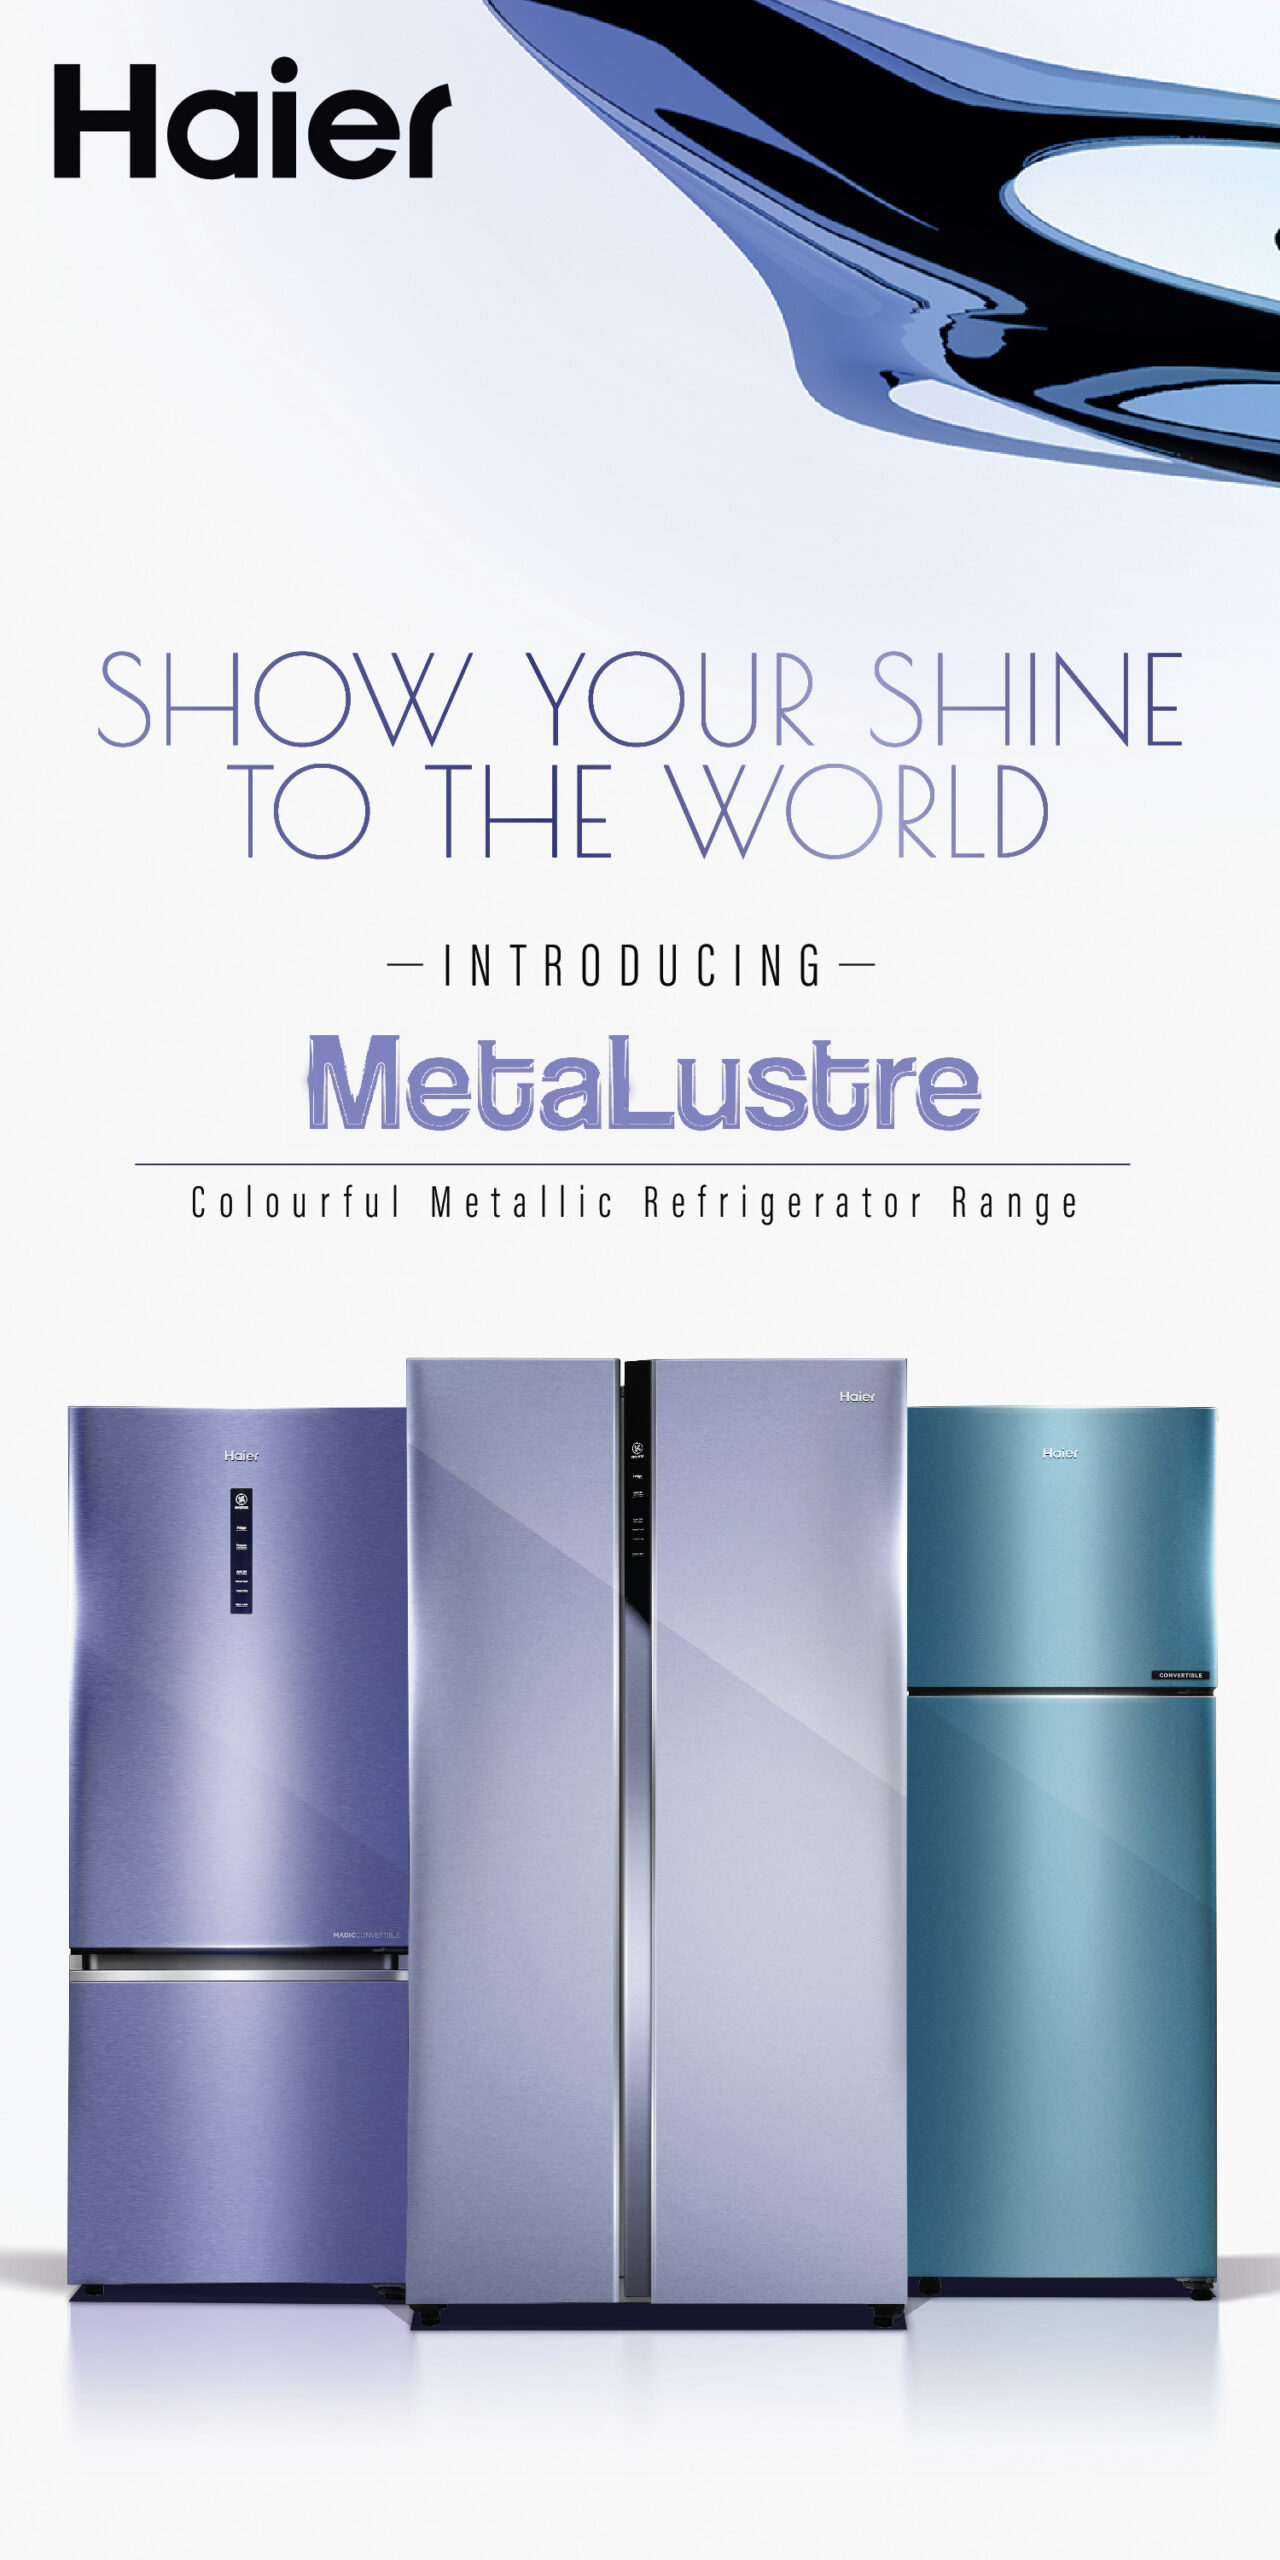 Haier India Introduces Metalustre Refrigerator Series with Steel Finish